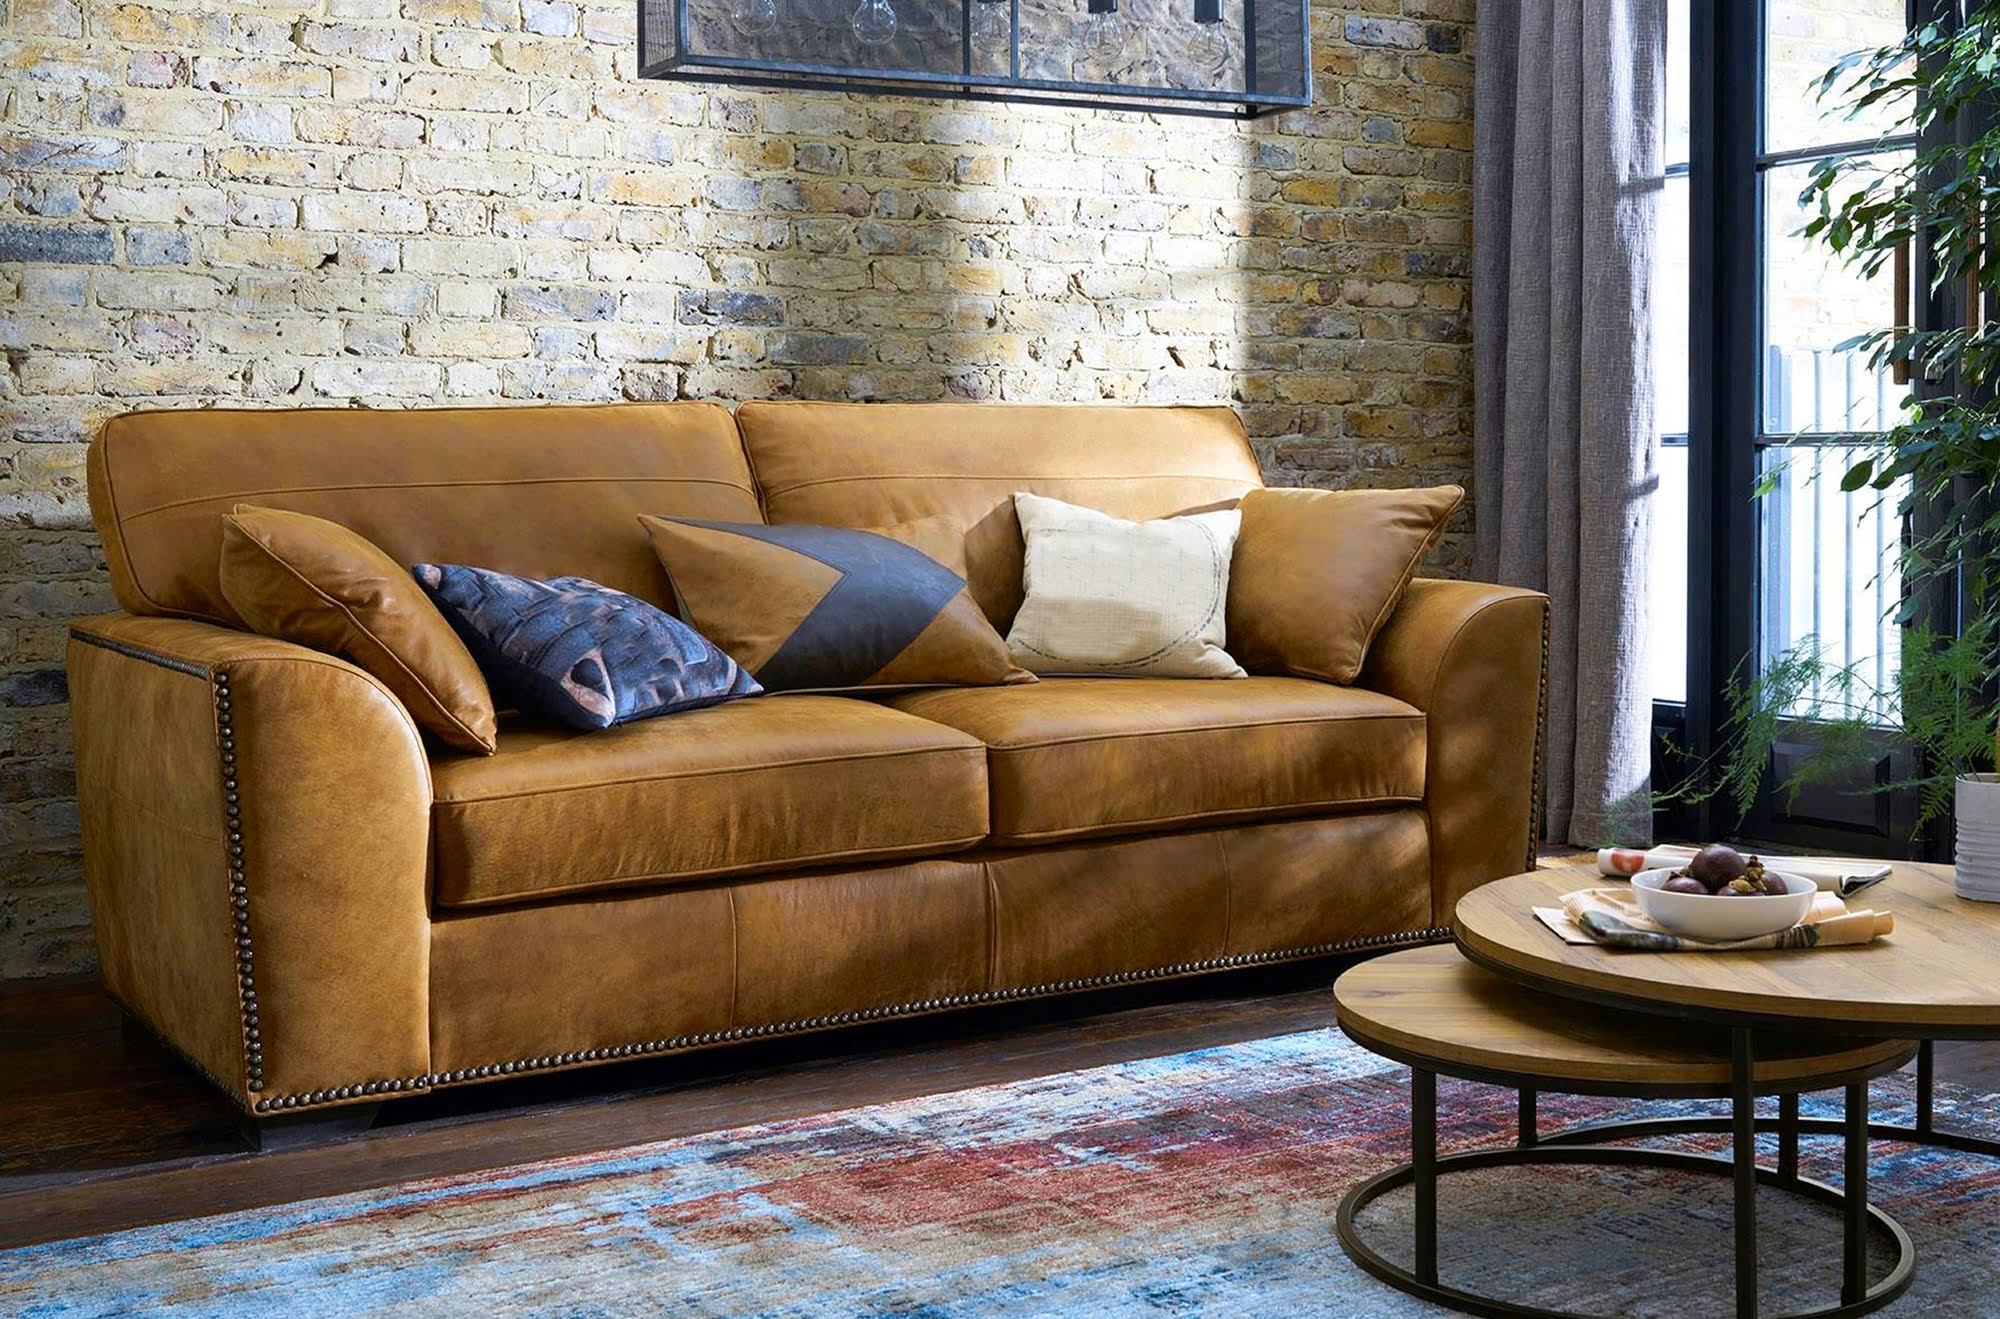 best color rug for brown leather sofa